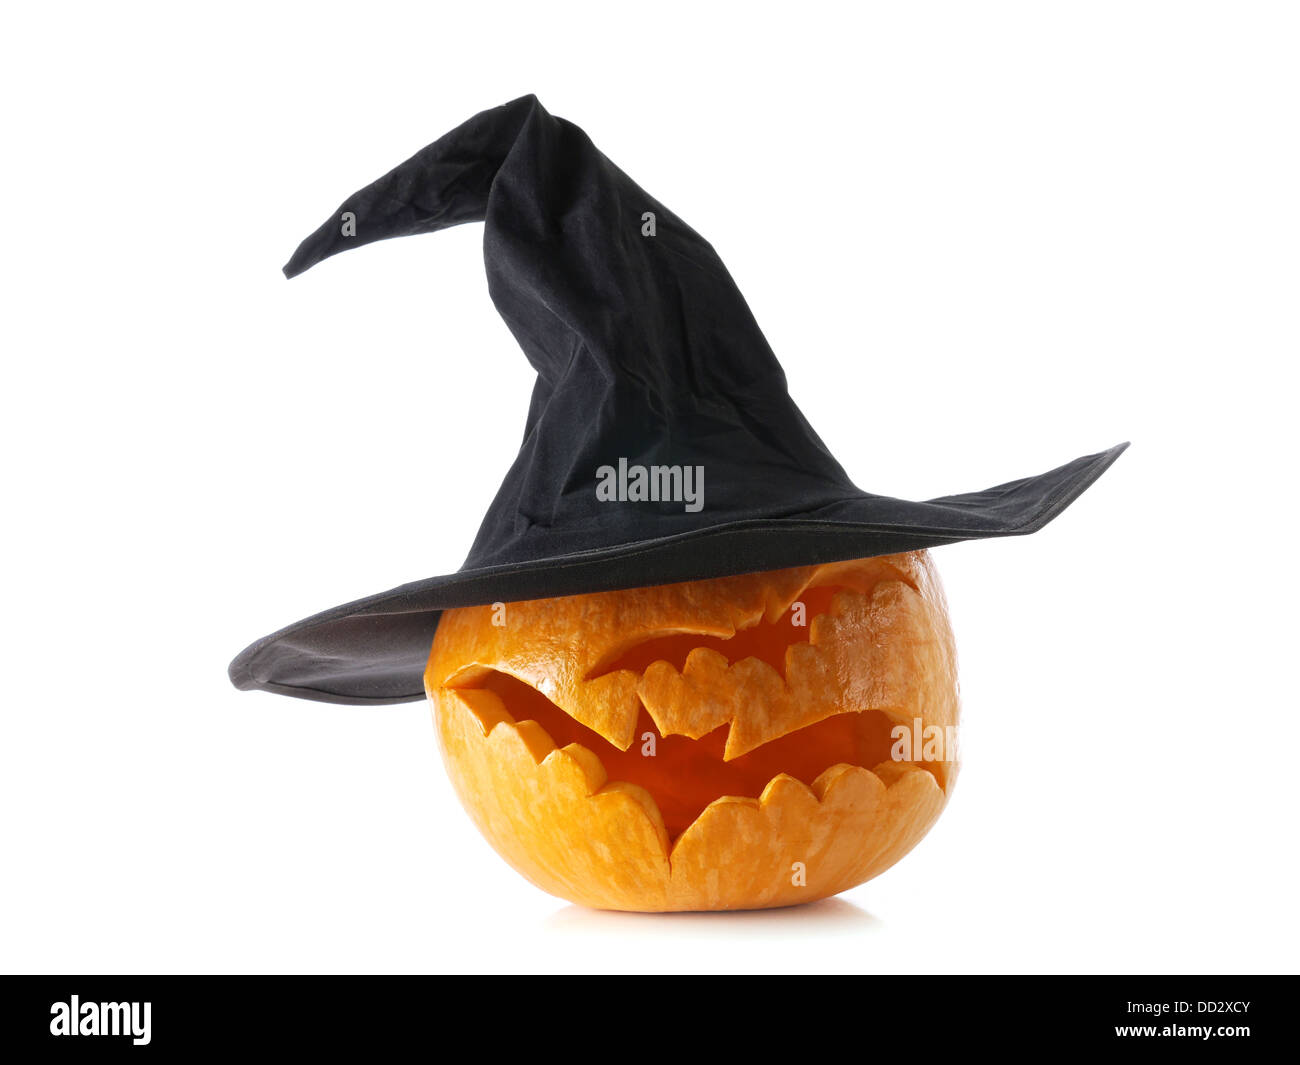 Jack-o-lantern pumpkin with witch hat on white background Stock Photo